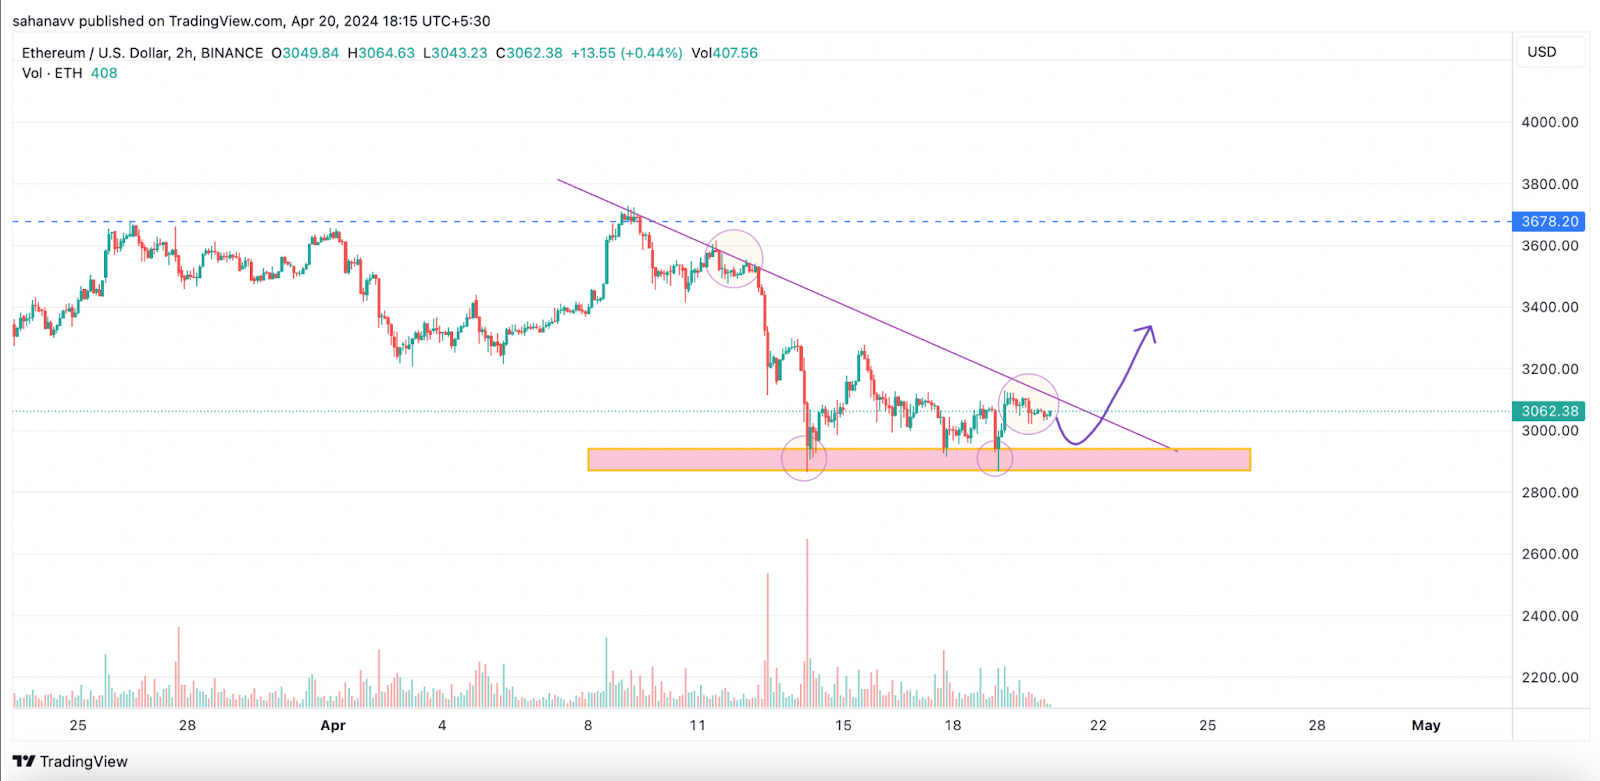 Ethereum (ETH) Price is Preparing to Break the Resistance, Can It Make It to 00?